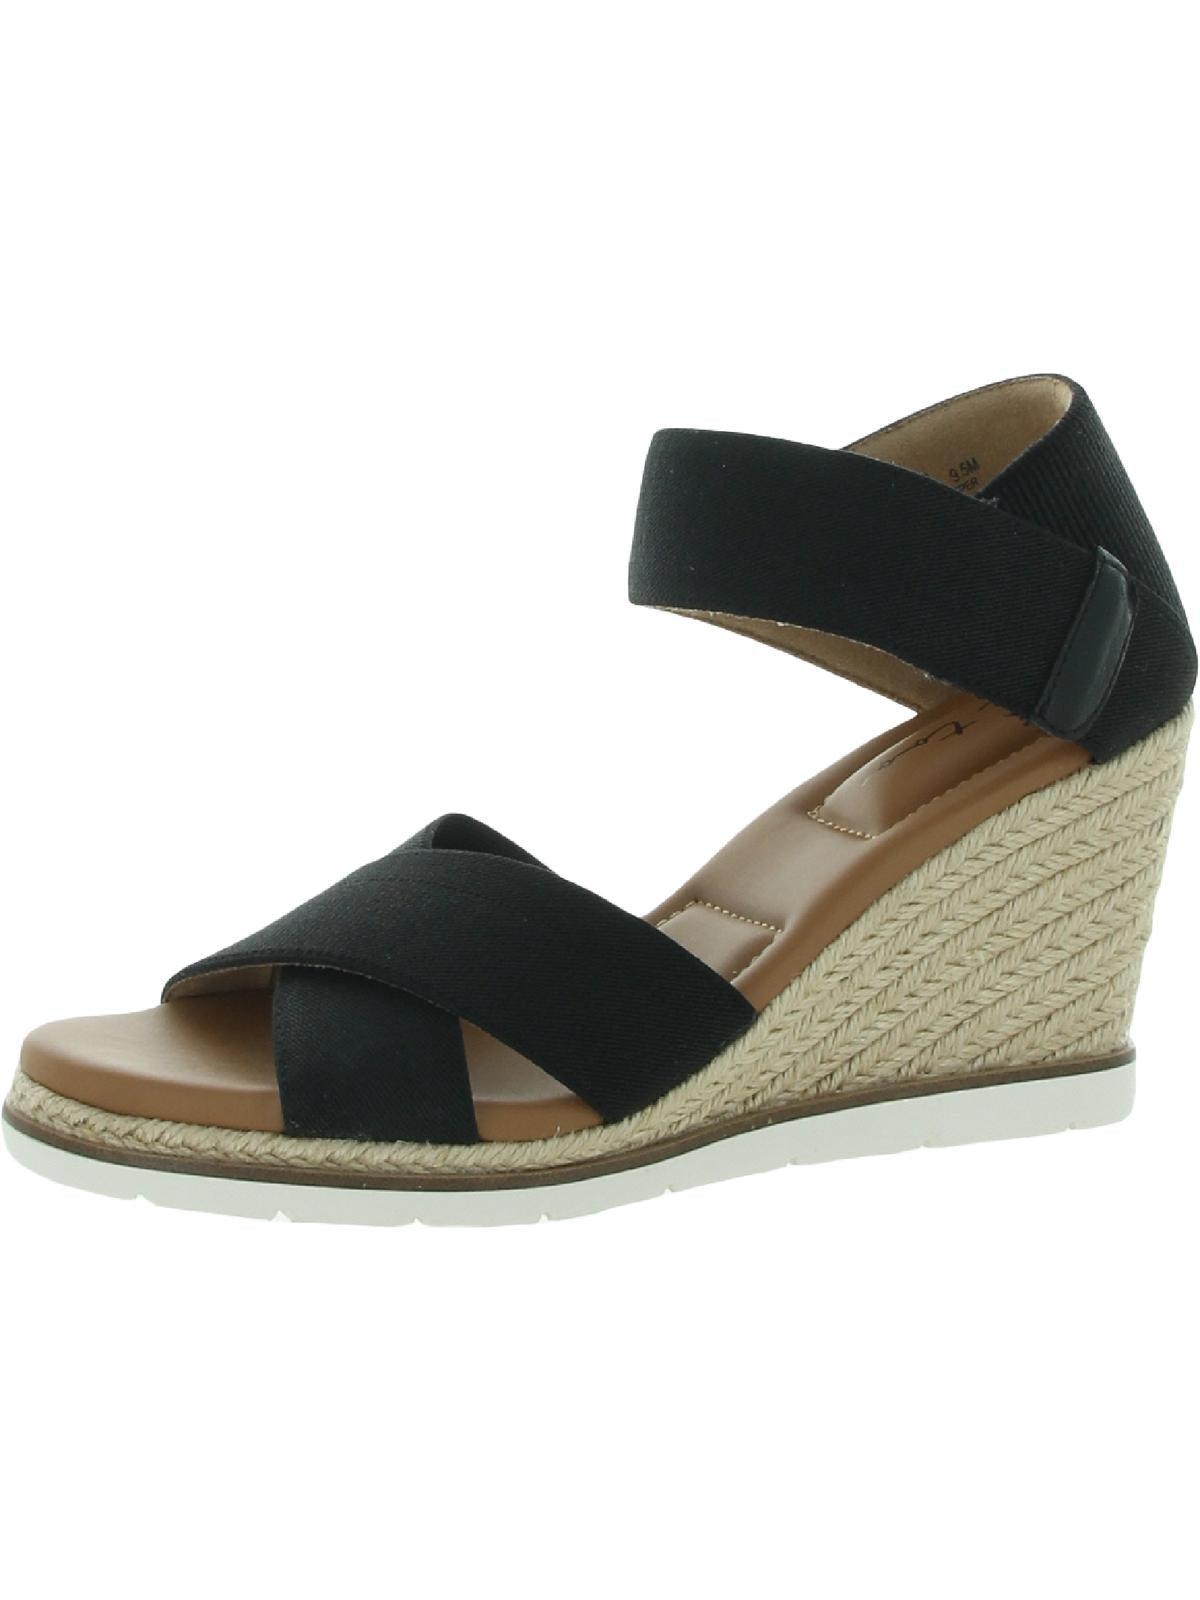 Me Too Gia 15 Memory Foam Strappy Wedge Sandals in Black | Lyst